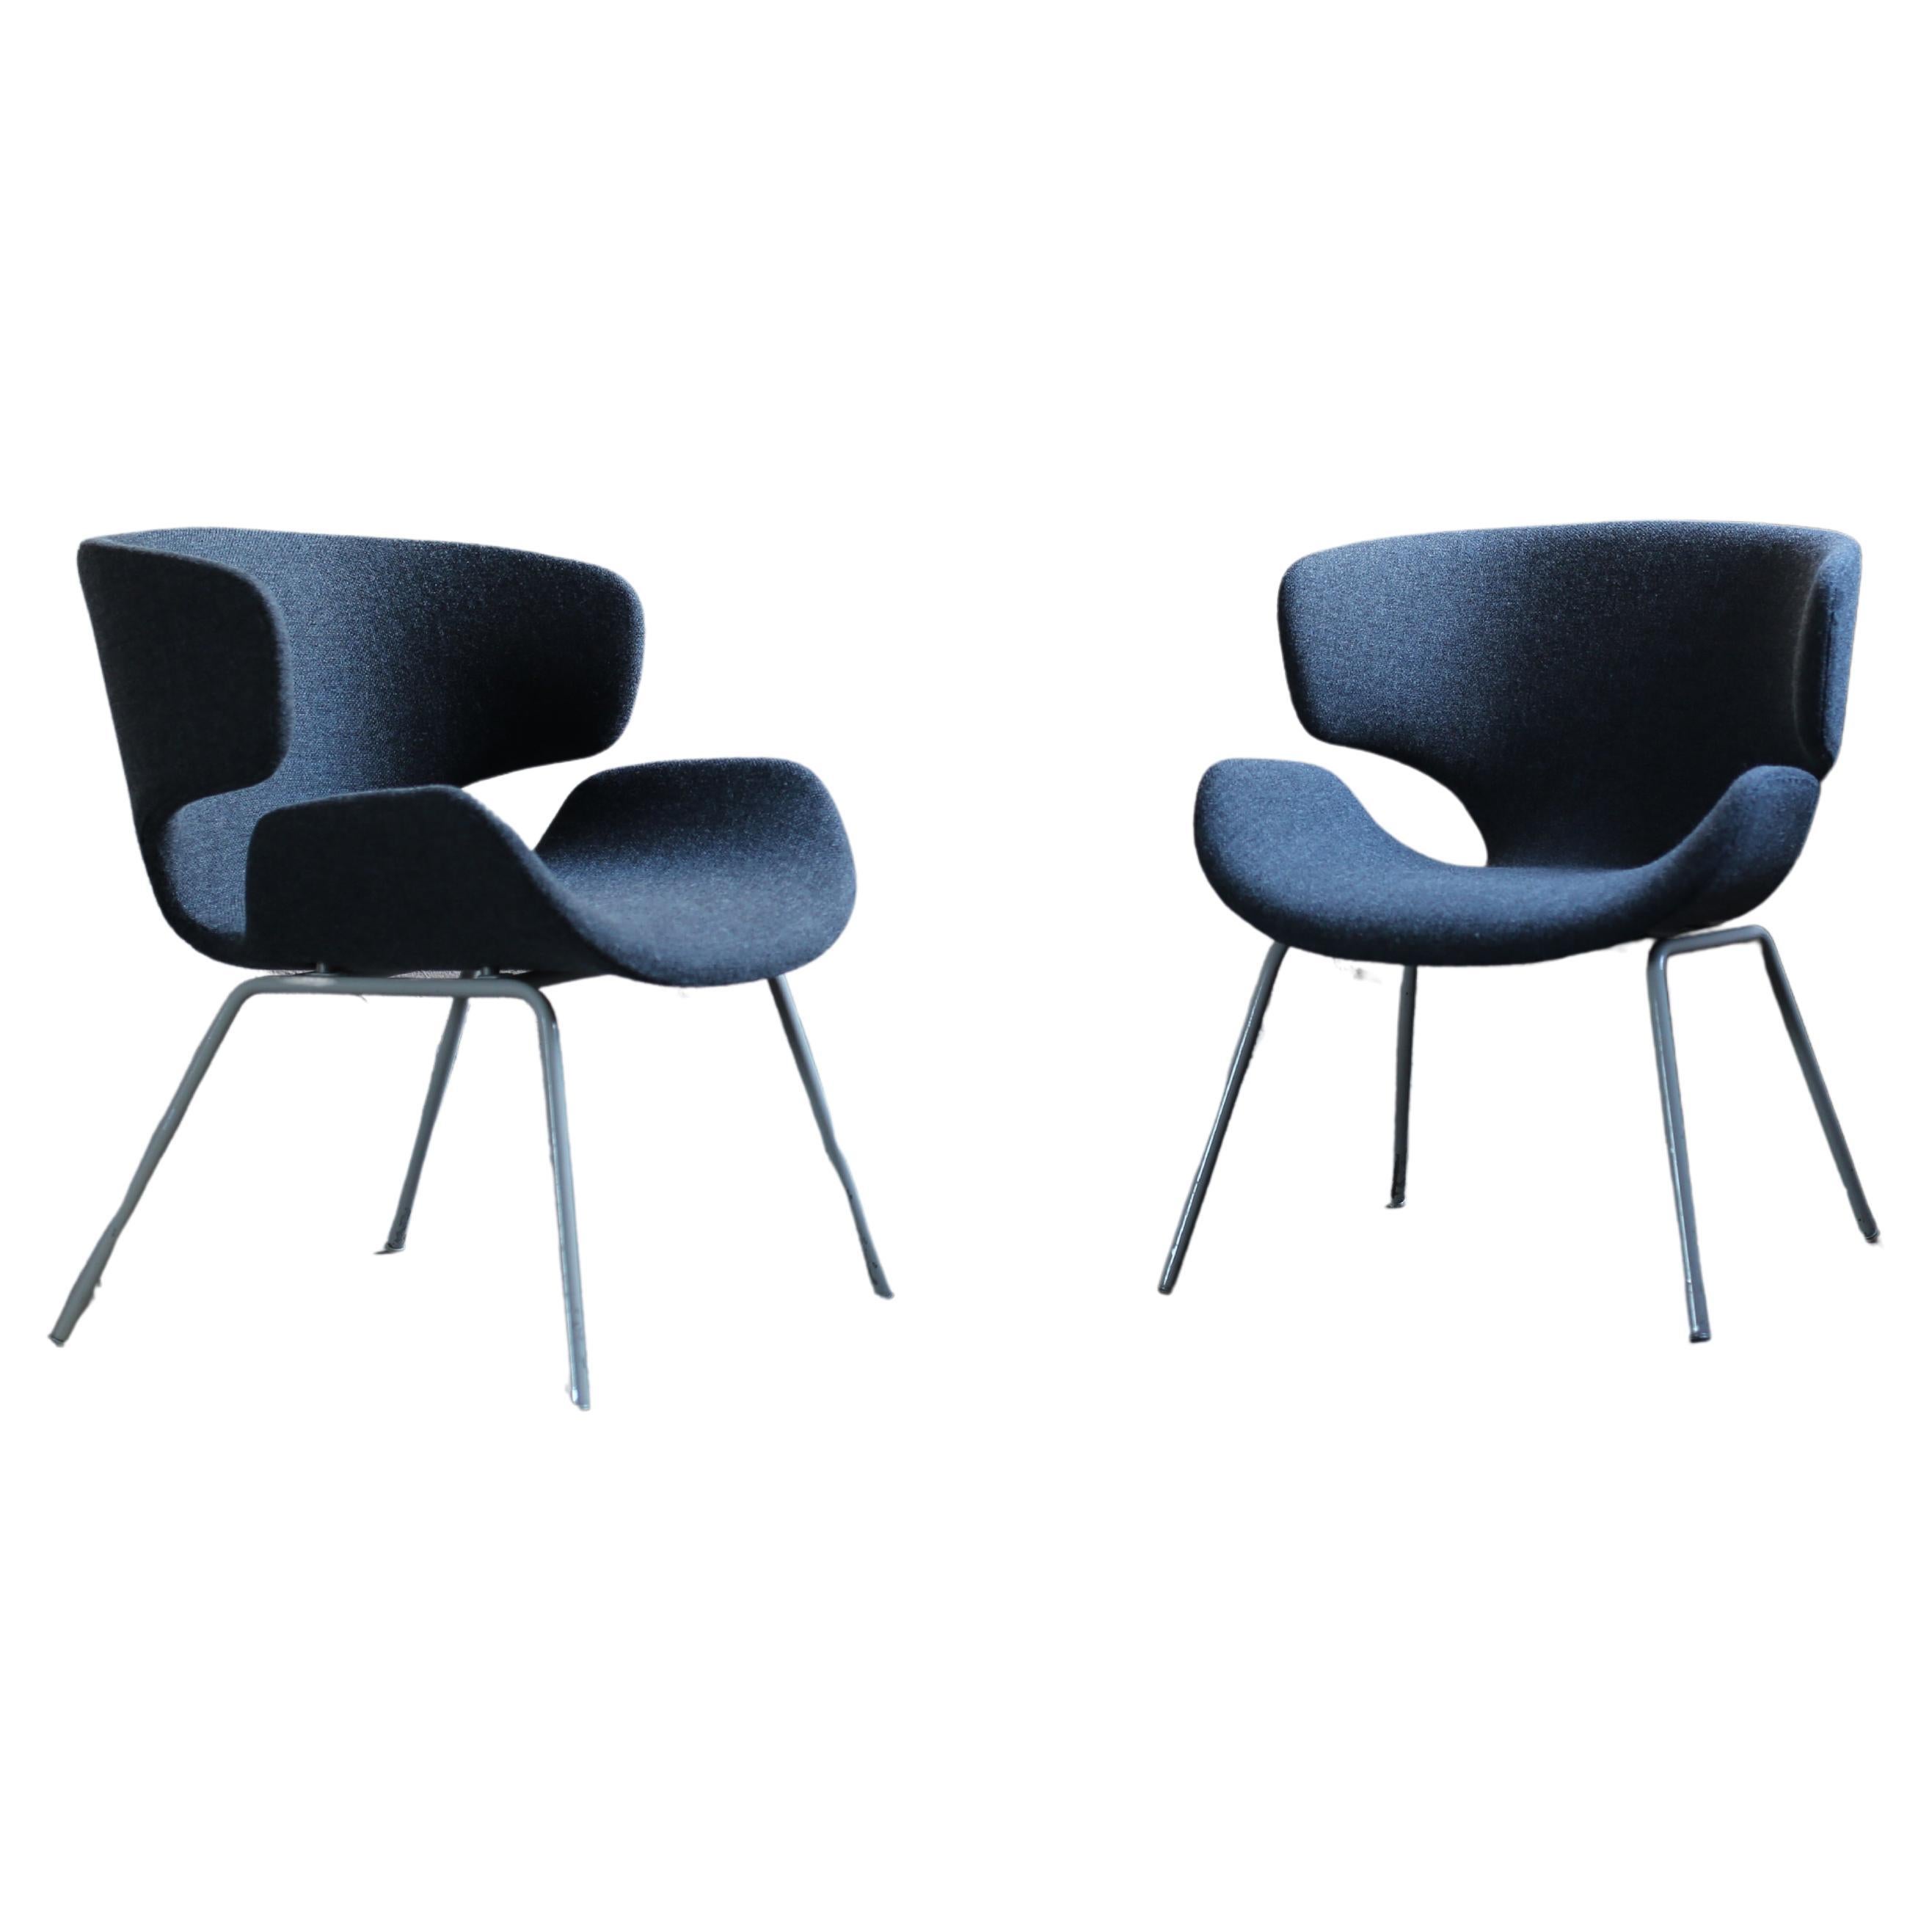 Pair of Kabuto Chairs by Isamu Kenmochi for Tendo Mokko For Sale